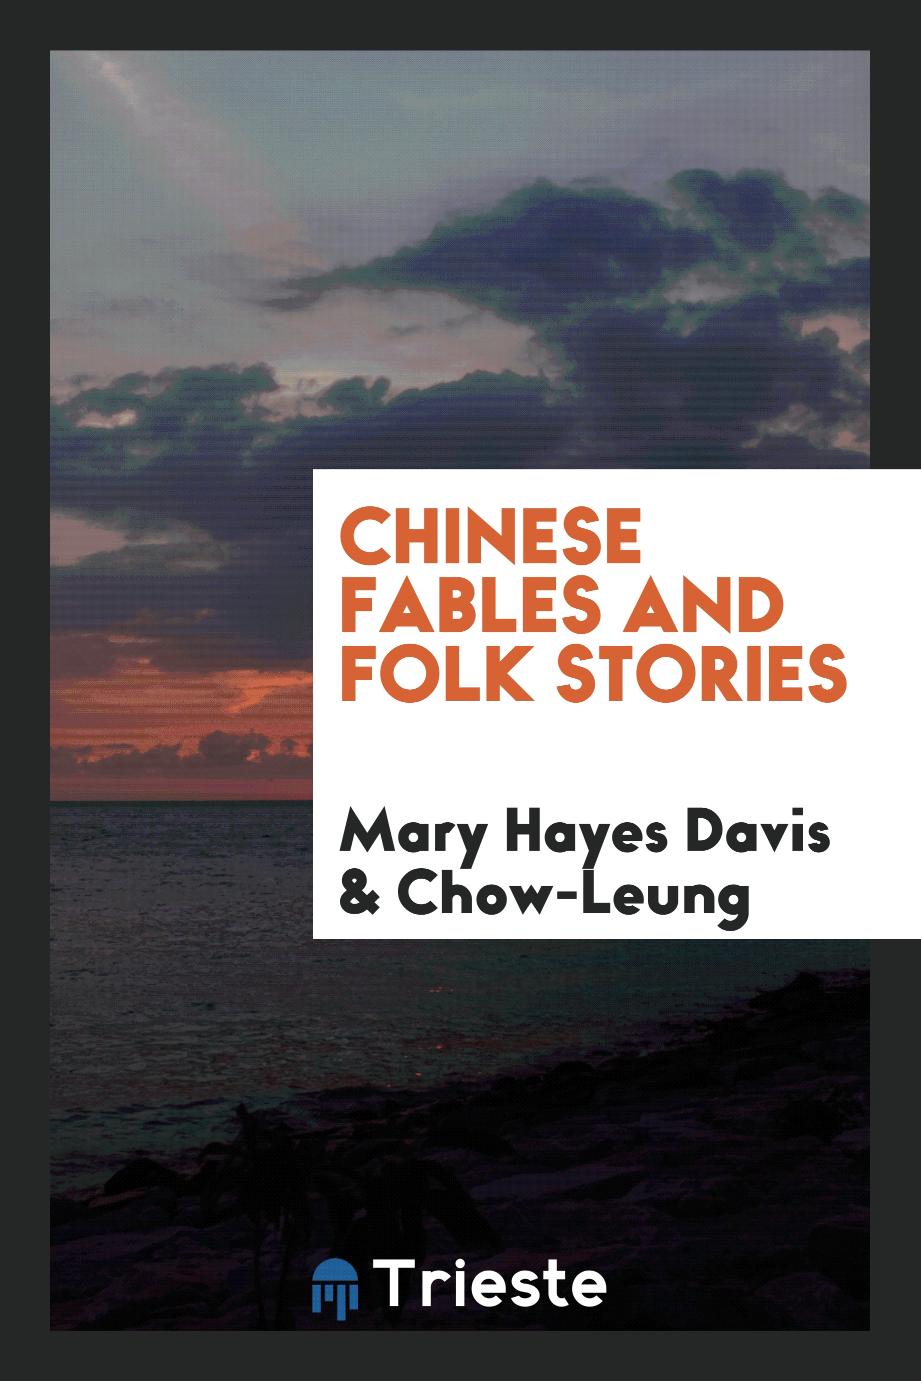 Chinese fables and folk stories